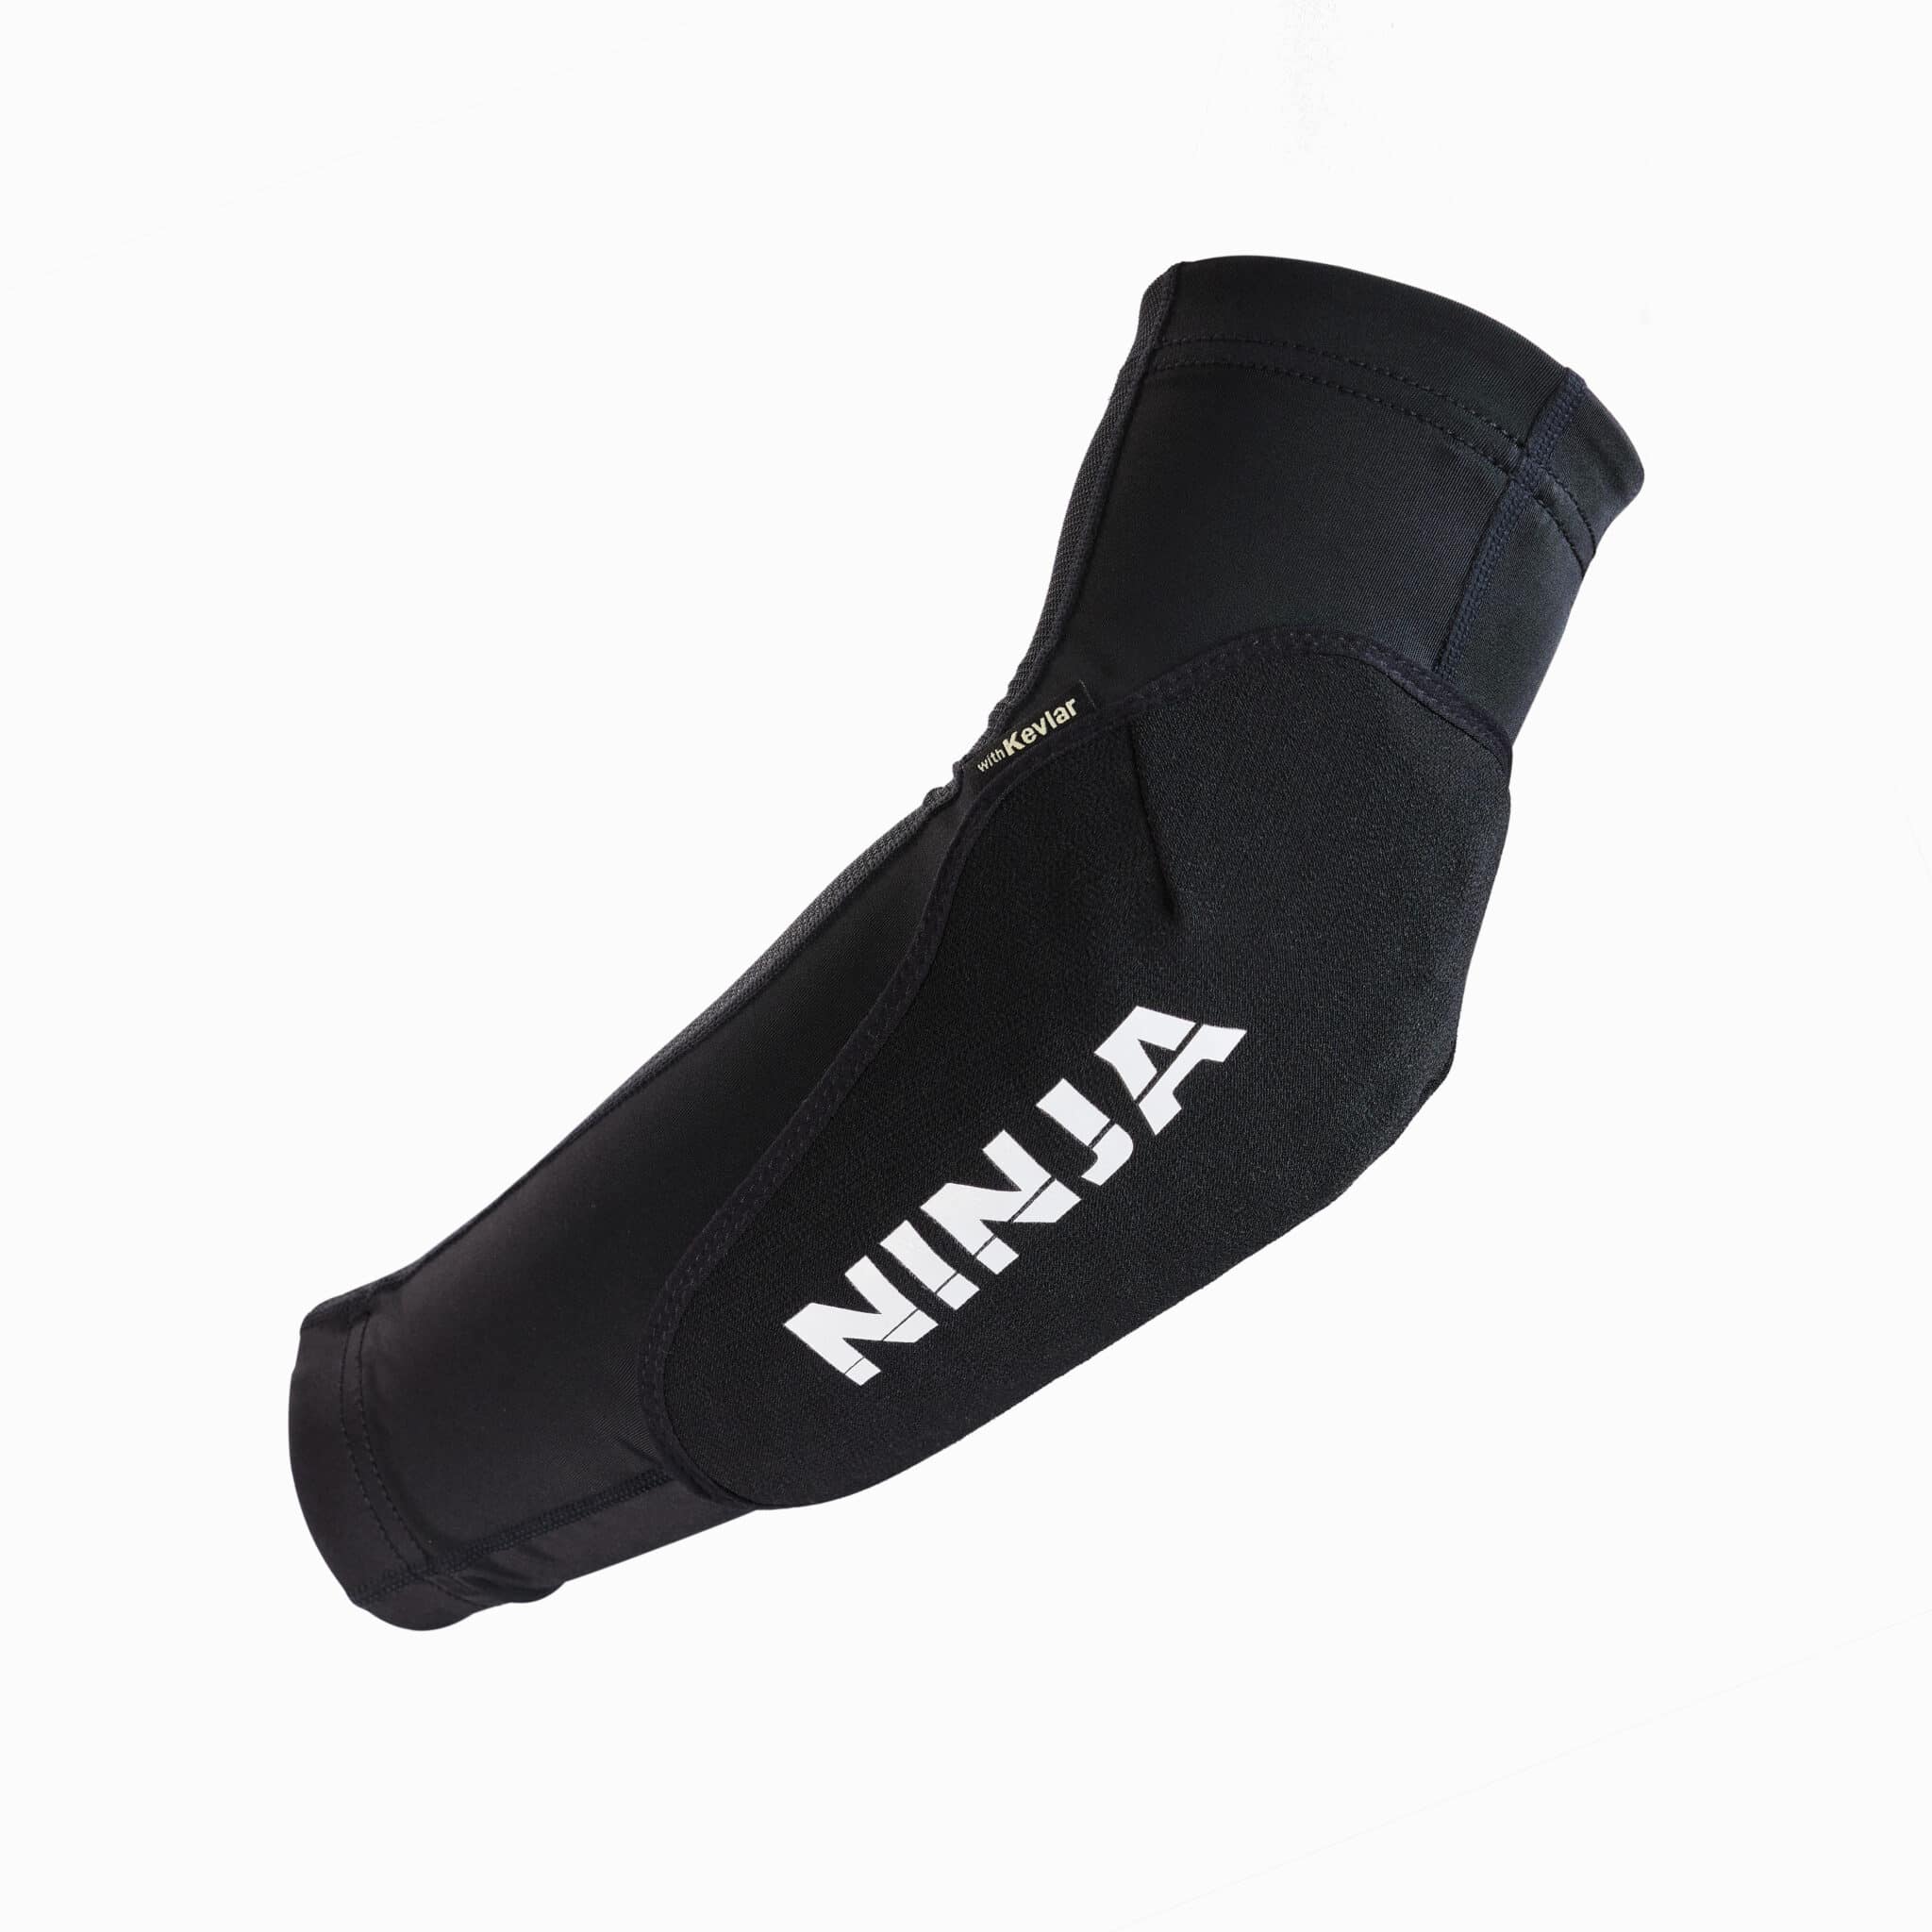 Ninja MTB Speed King Elbow Pad Lightweight BMX and Mountain Bike Elbow Pads for Great Protection 